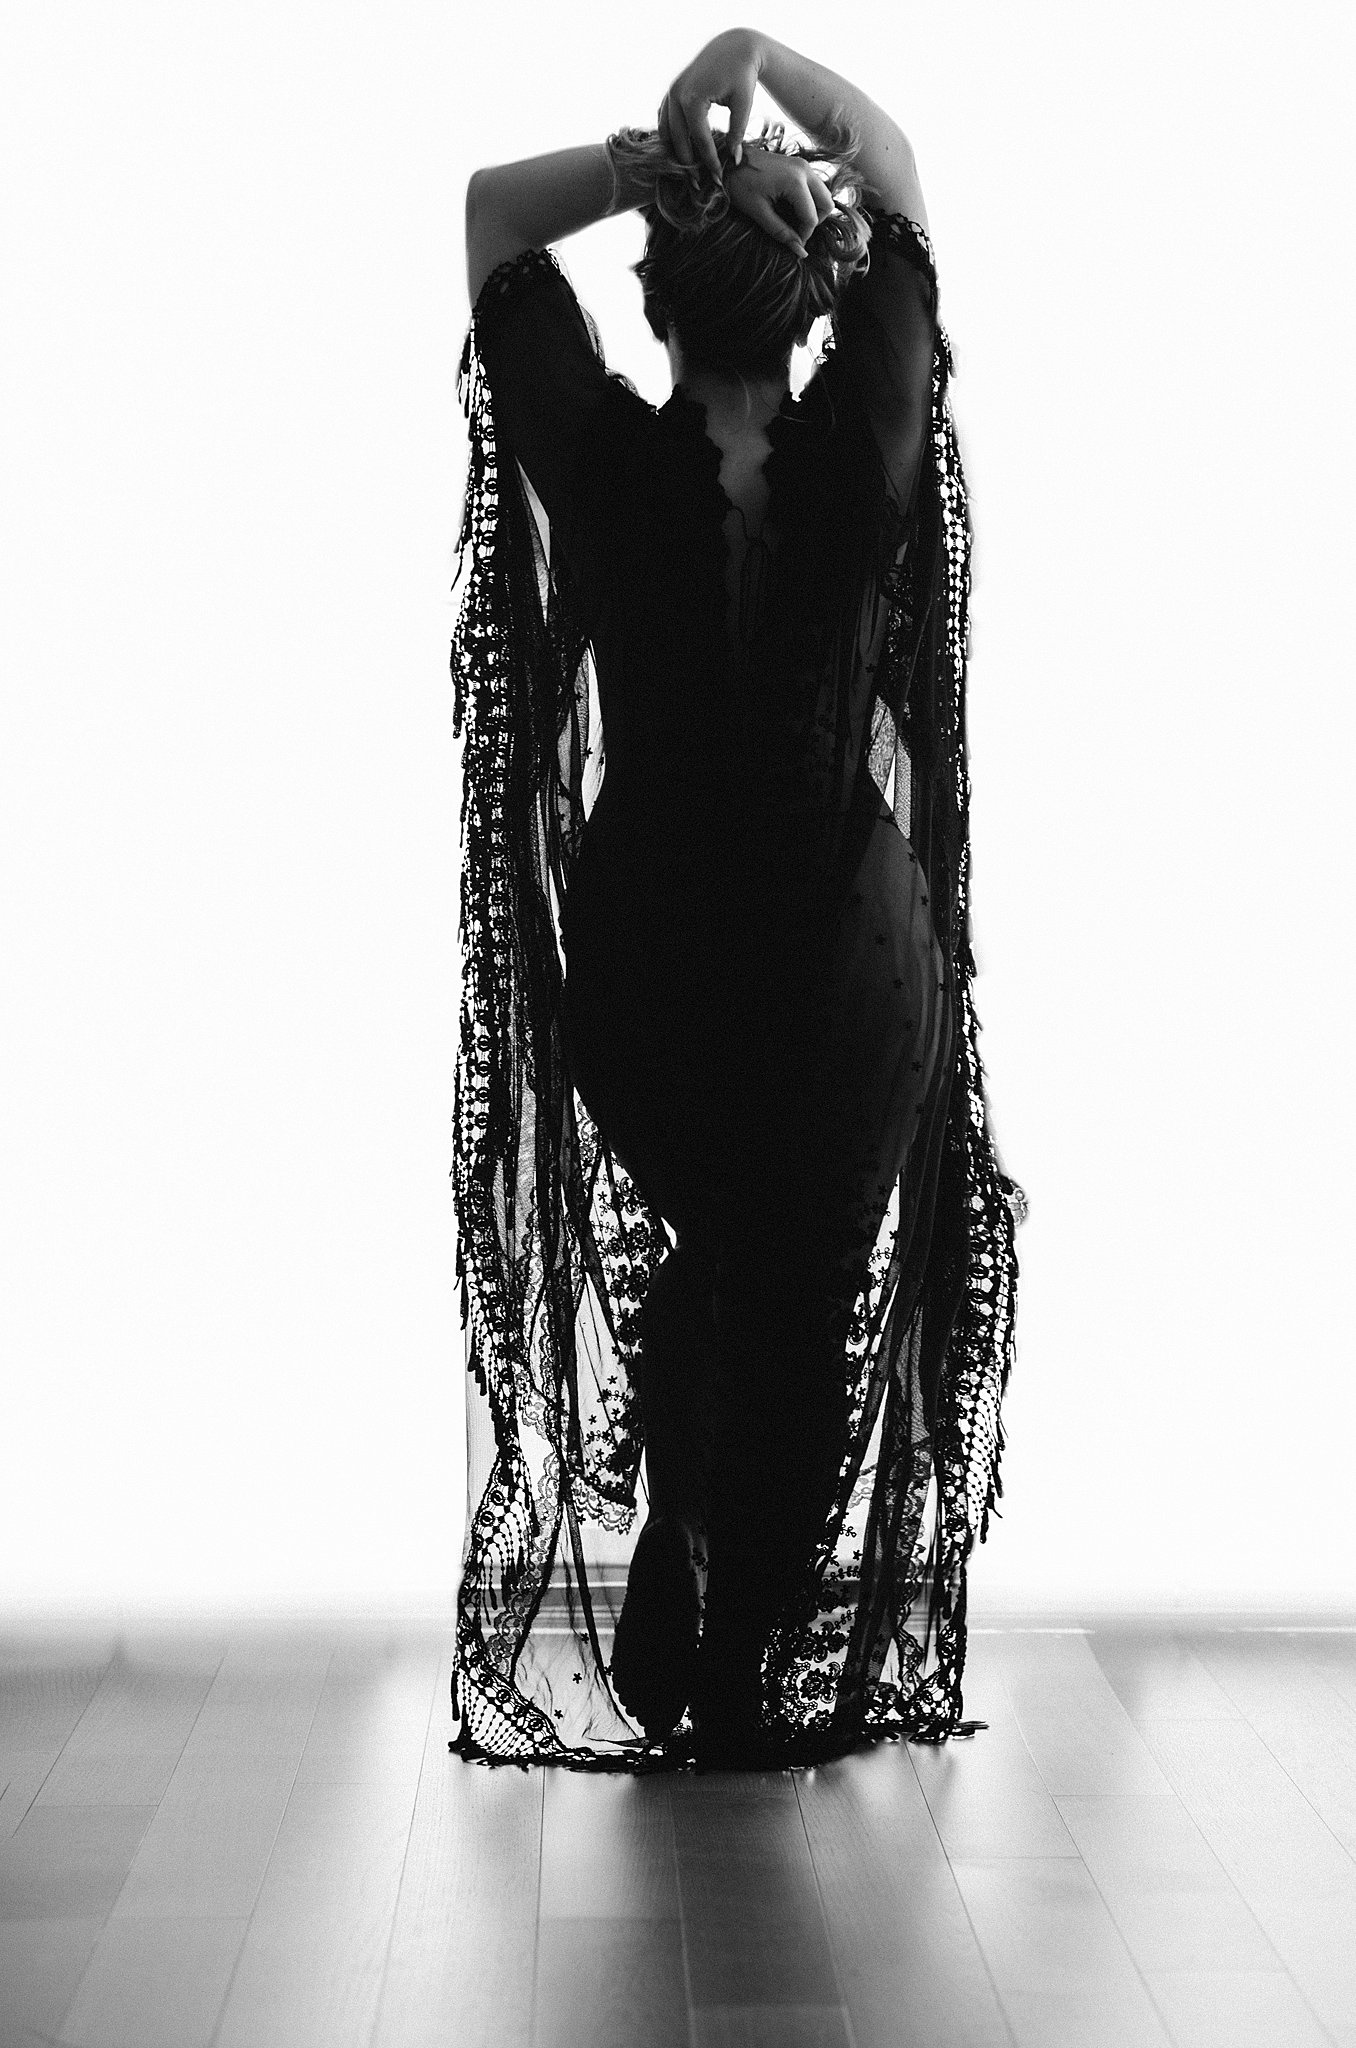 A woman stands in a studio wearing a lace coverup holds her hair above her head intimissimi miami